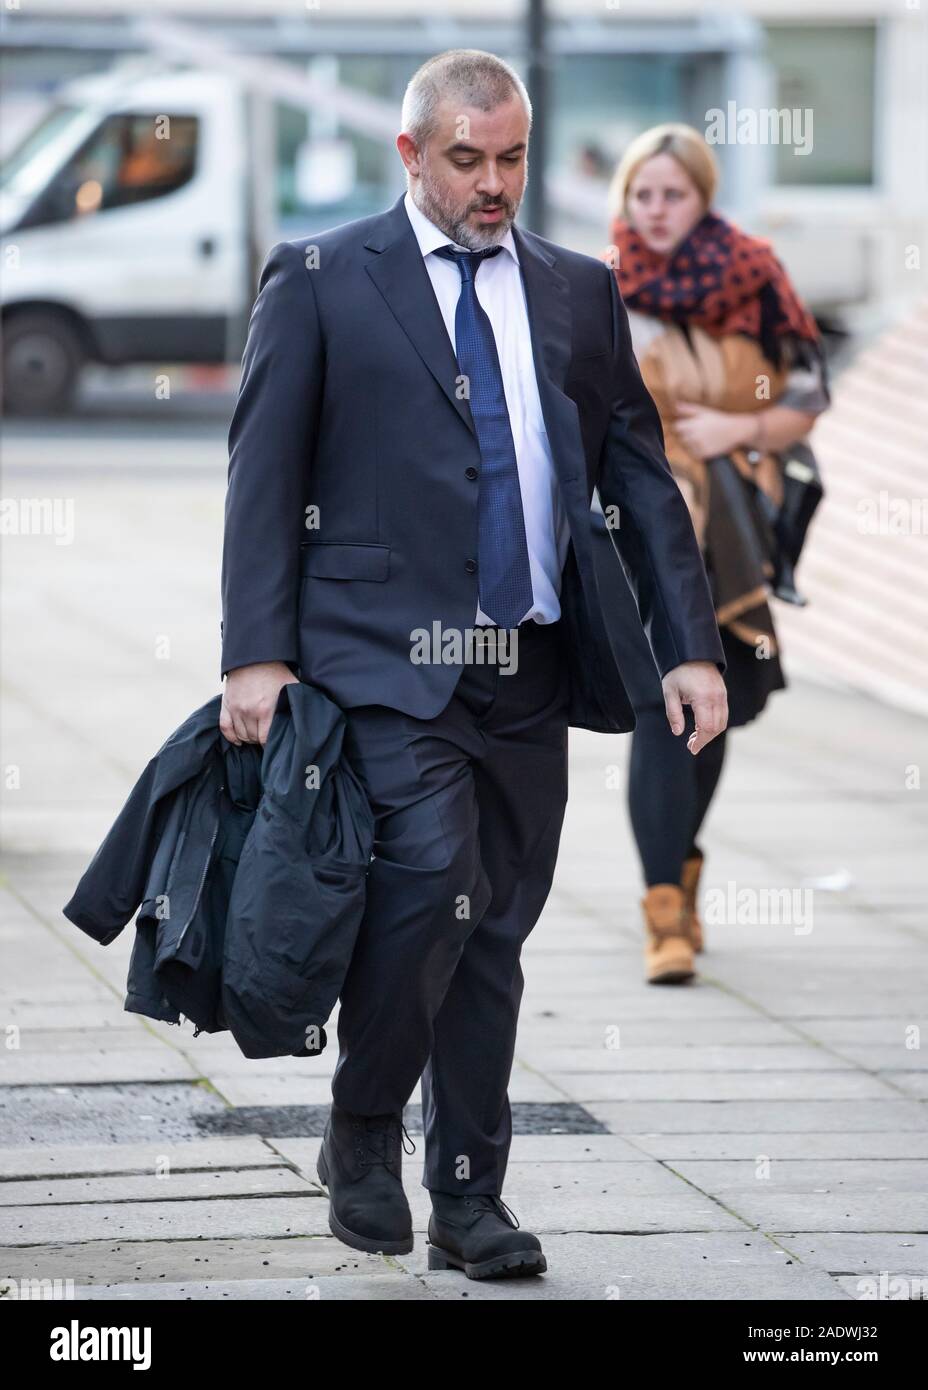 Ed Sheeran's manager Stuart Camp arriving at Leeds Crown Court to appear for the secondary ticketing trial. 02/12/19 Stock Photo